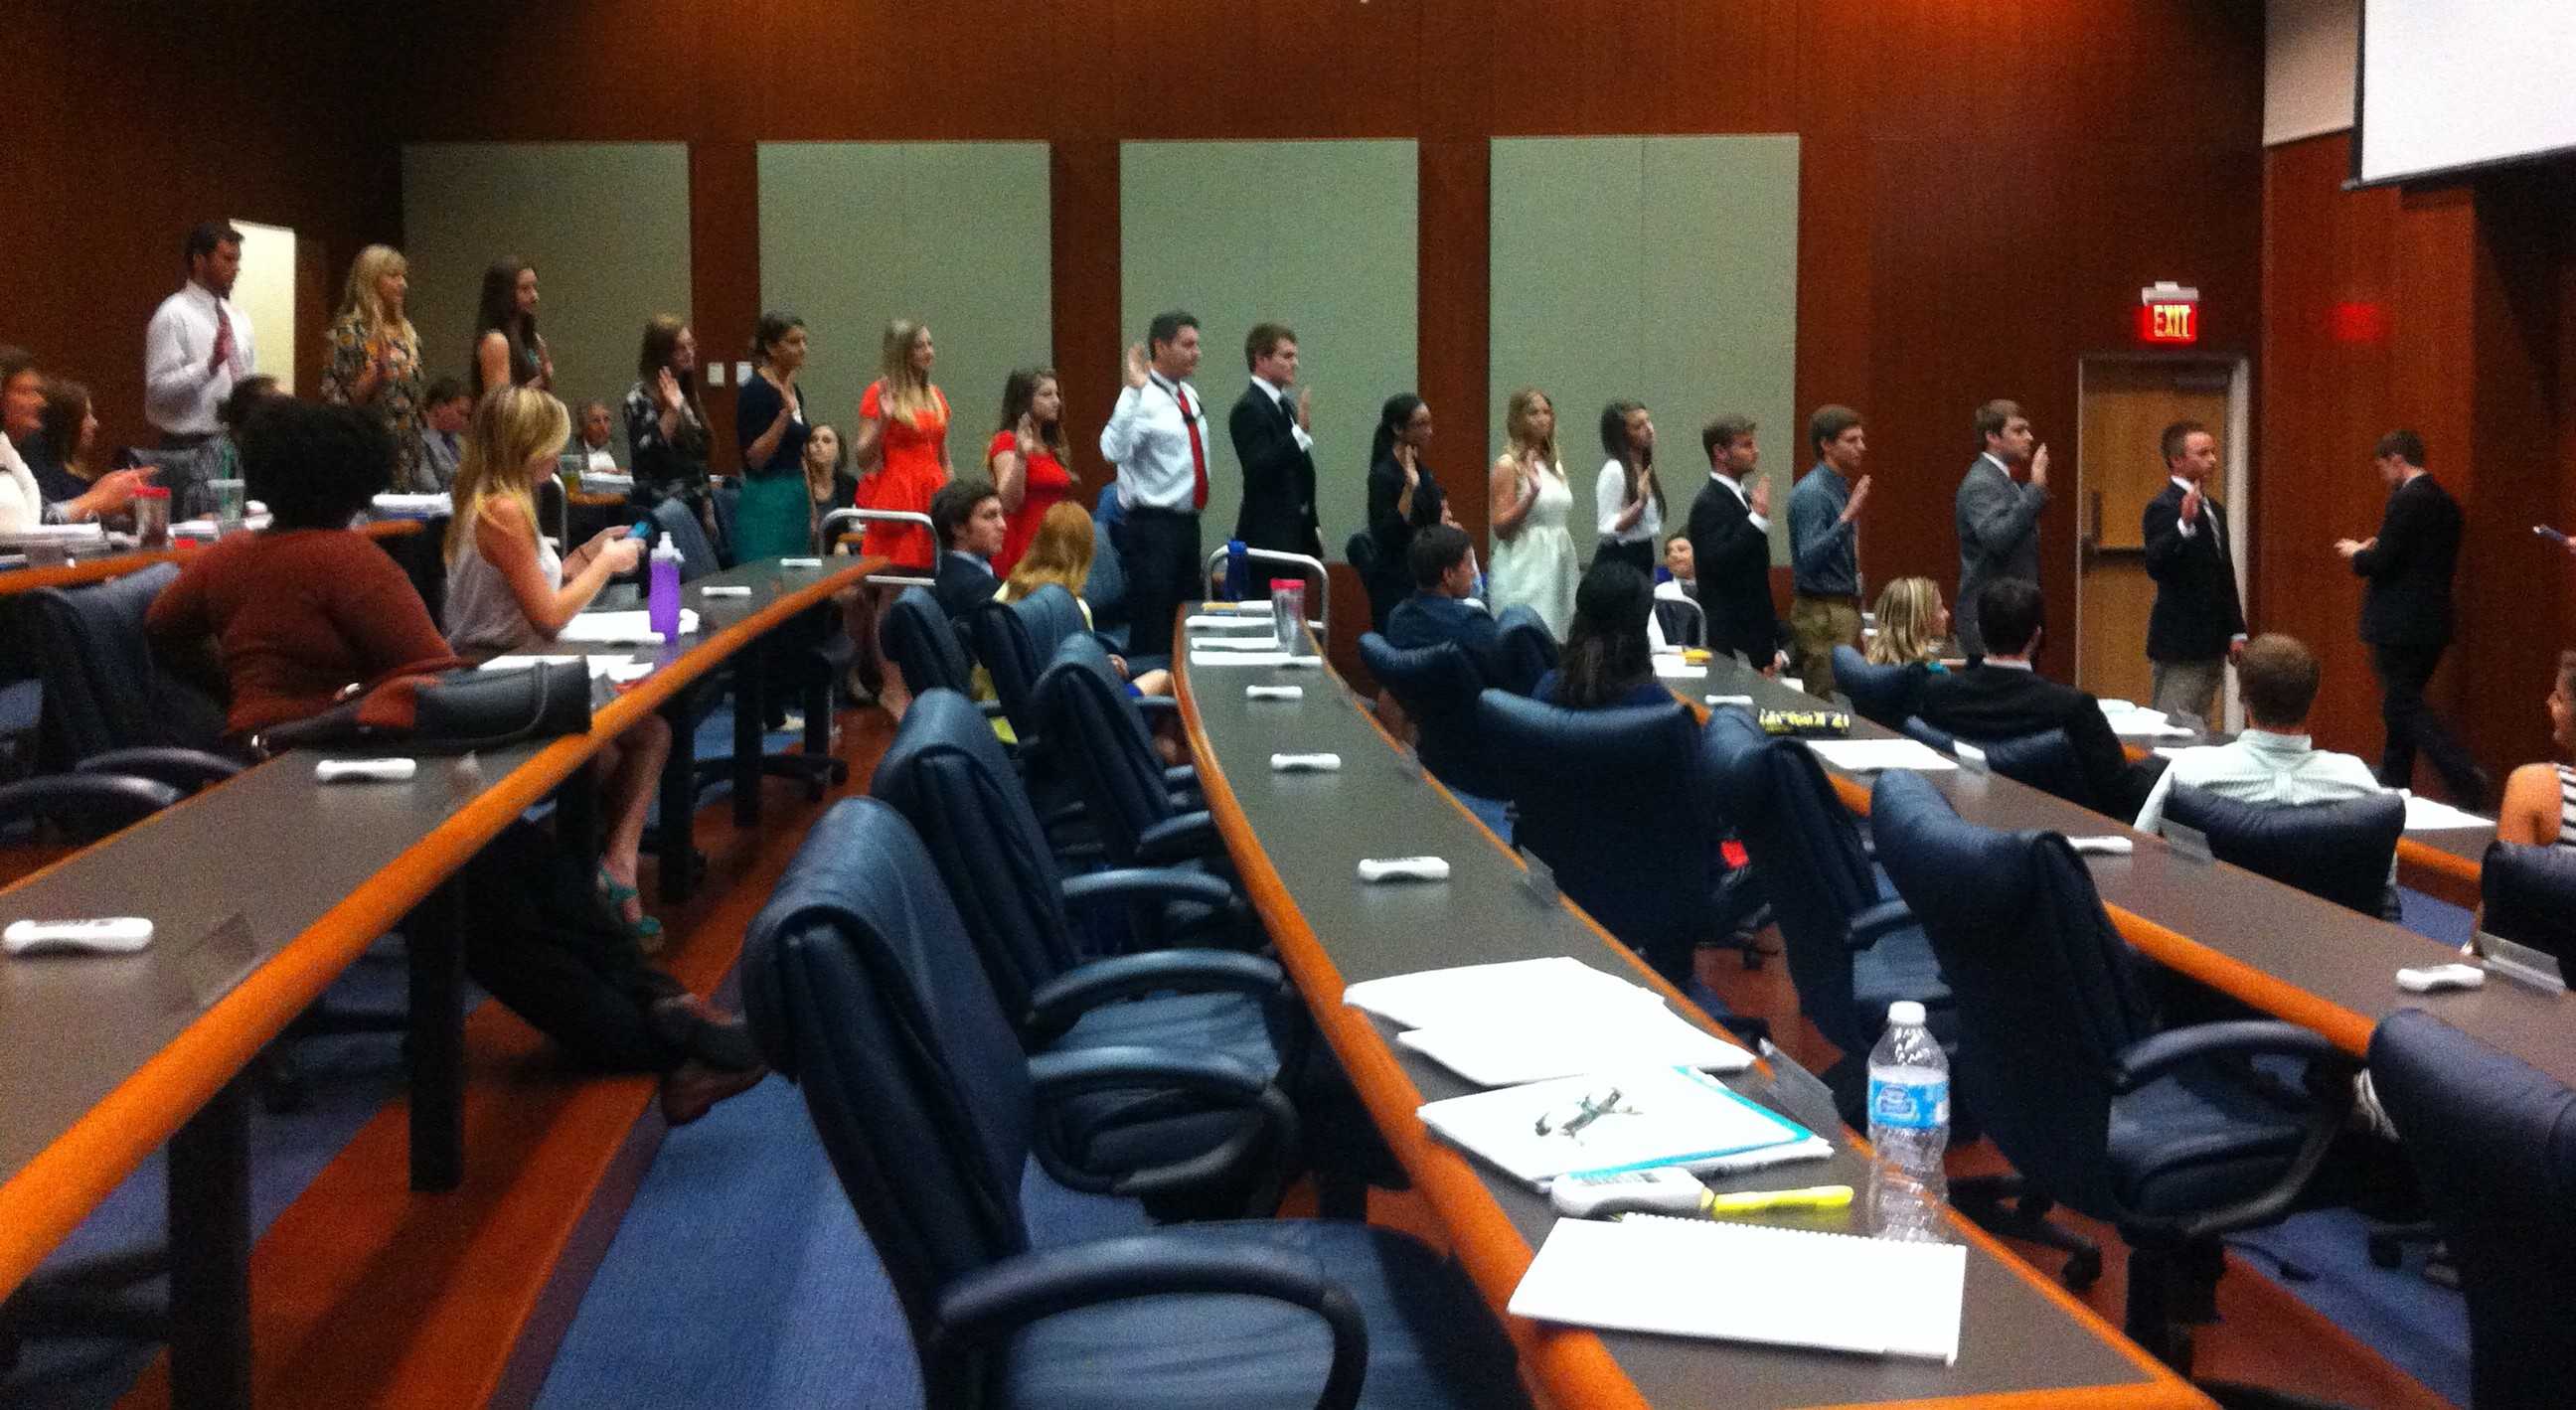 SG members, new and old, were sworn into various positions for next term. Photo by Tiffany Felts